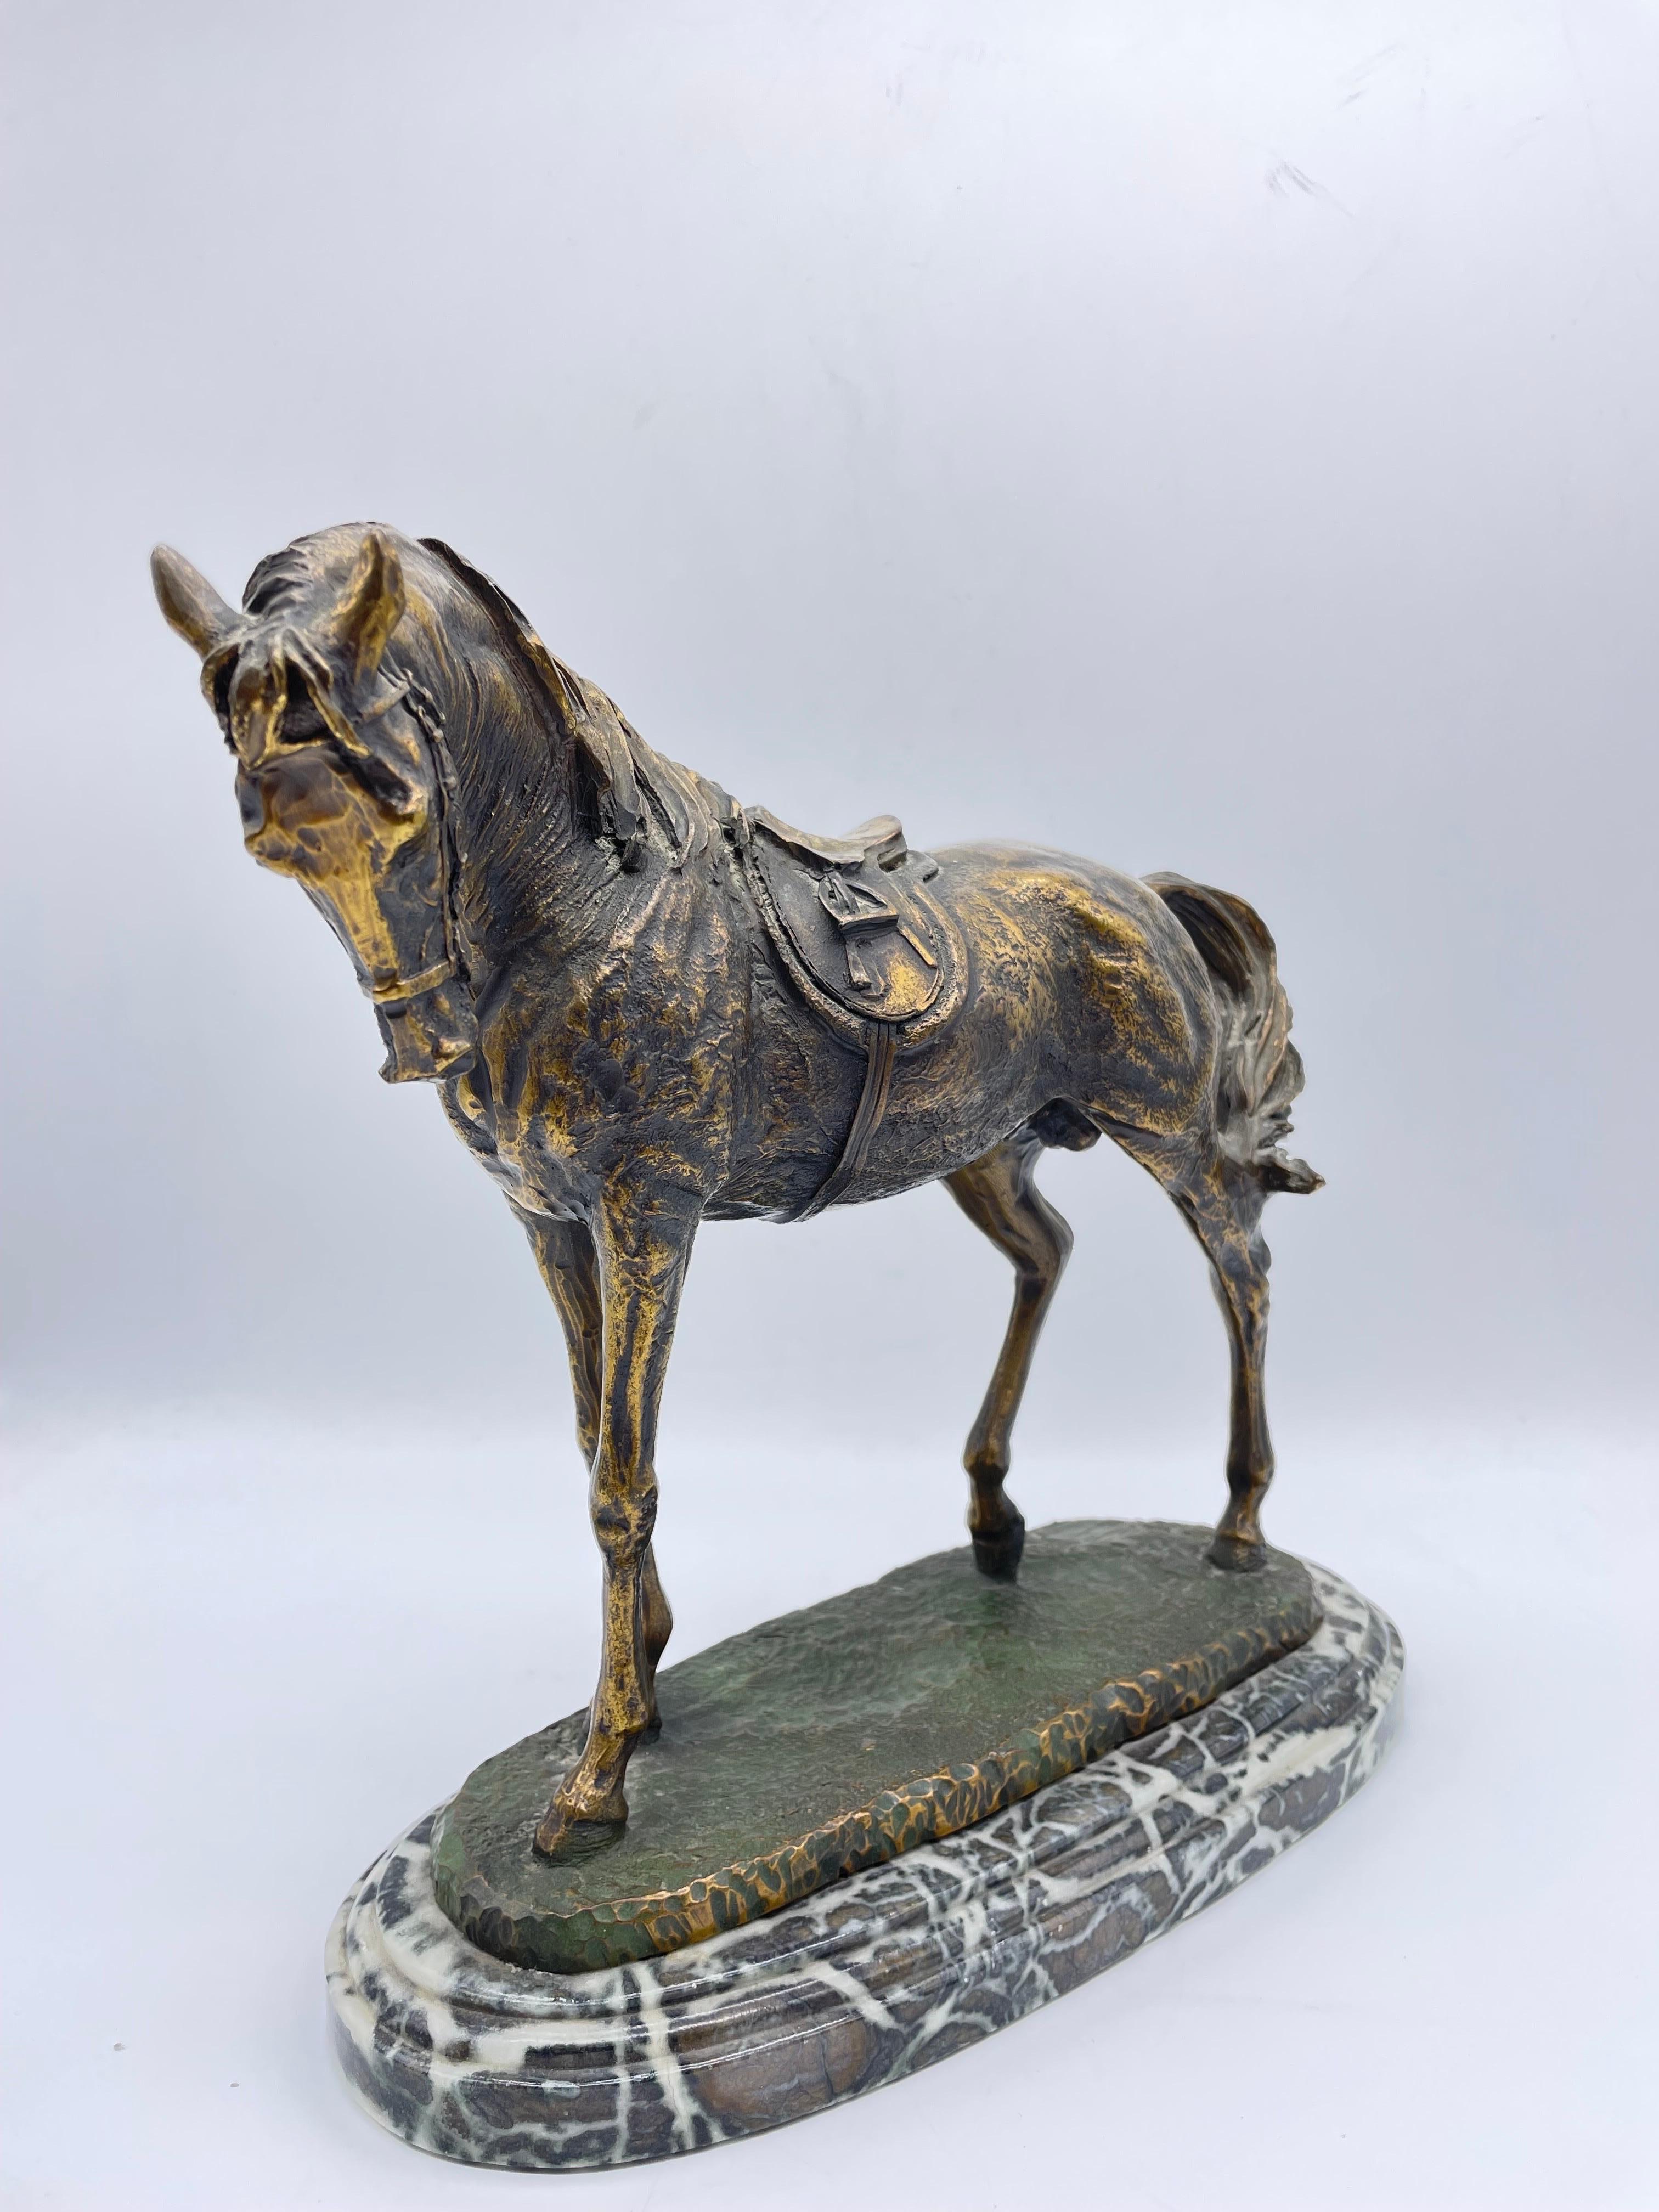 Fully sculpted horse sculpture on marble.

Detailed horse sculpture, zinc patented on oval profiled marble base.